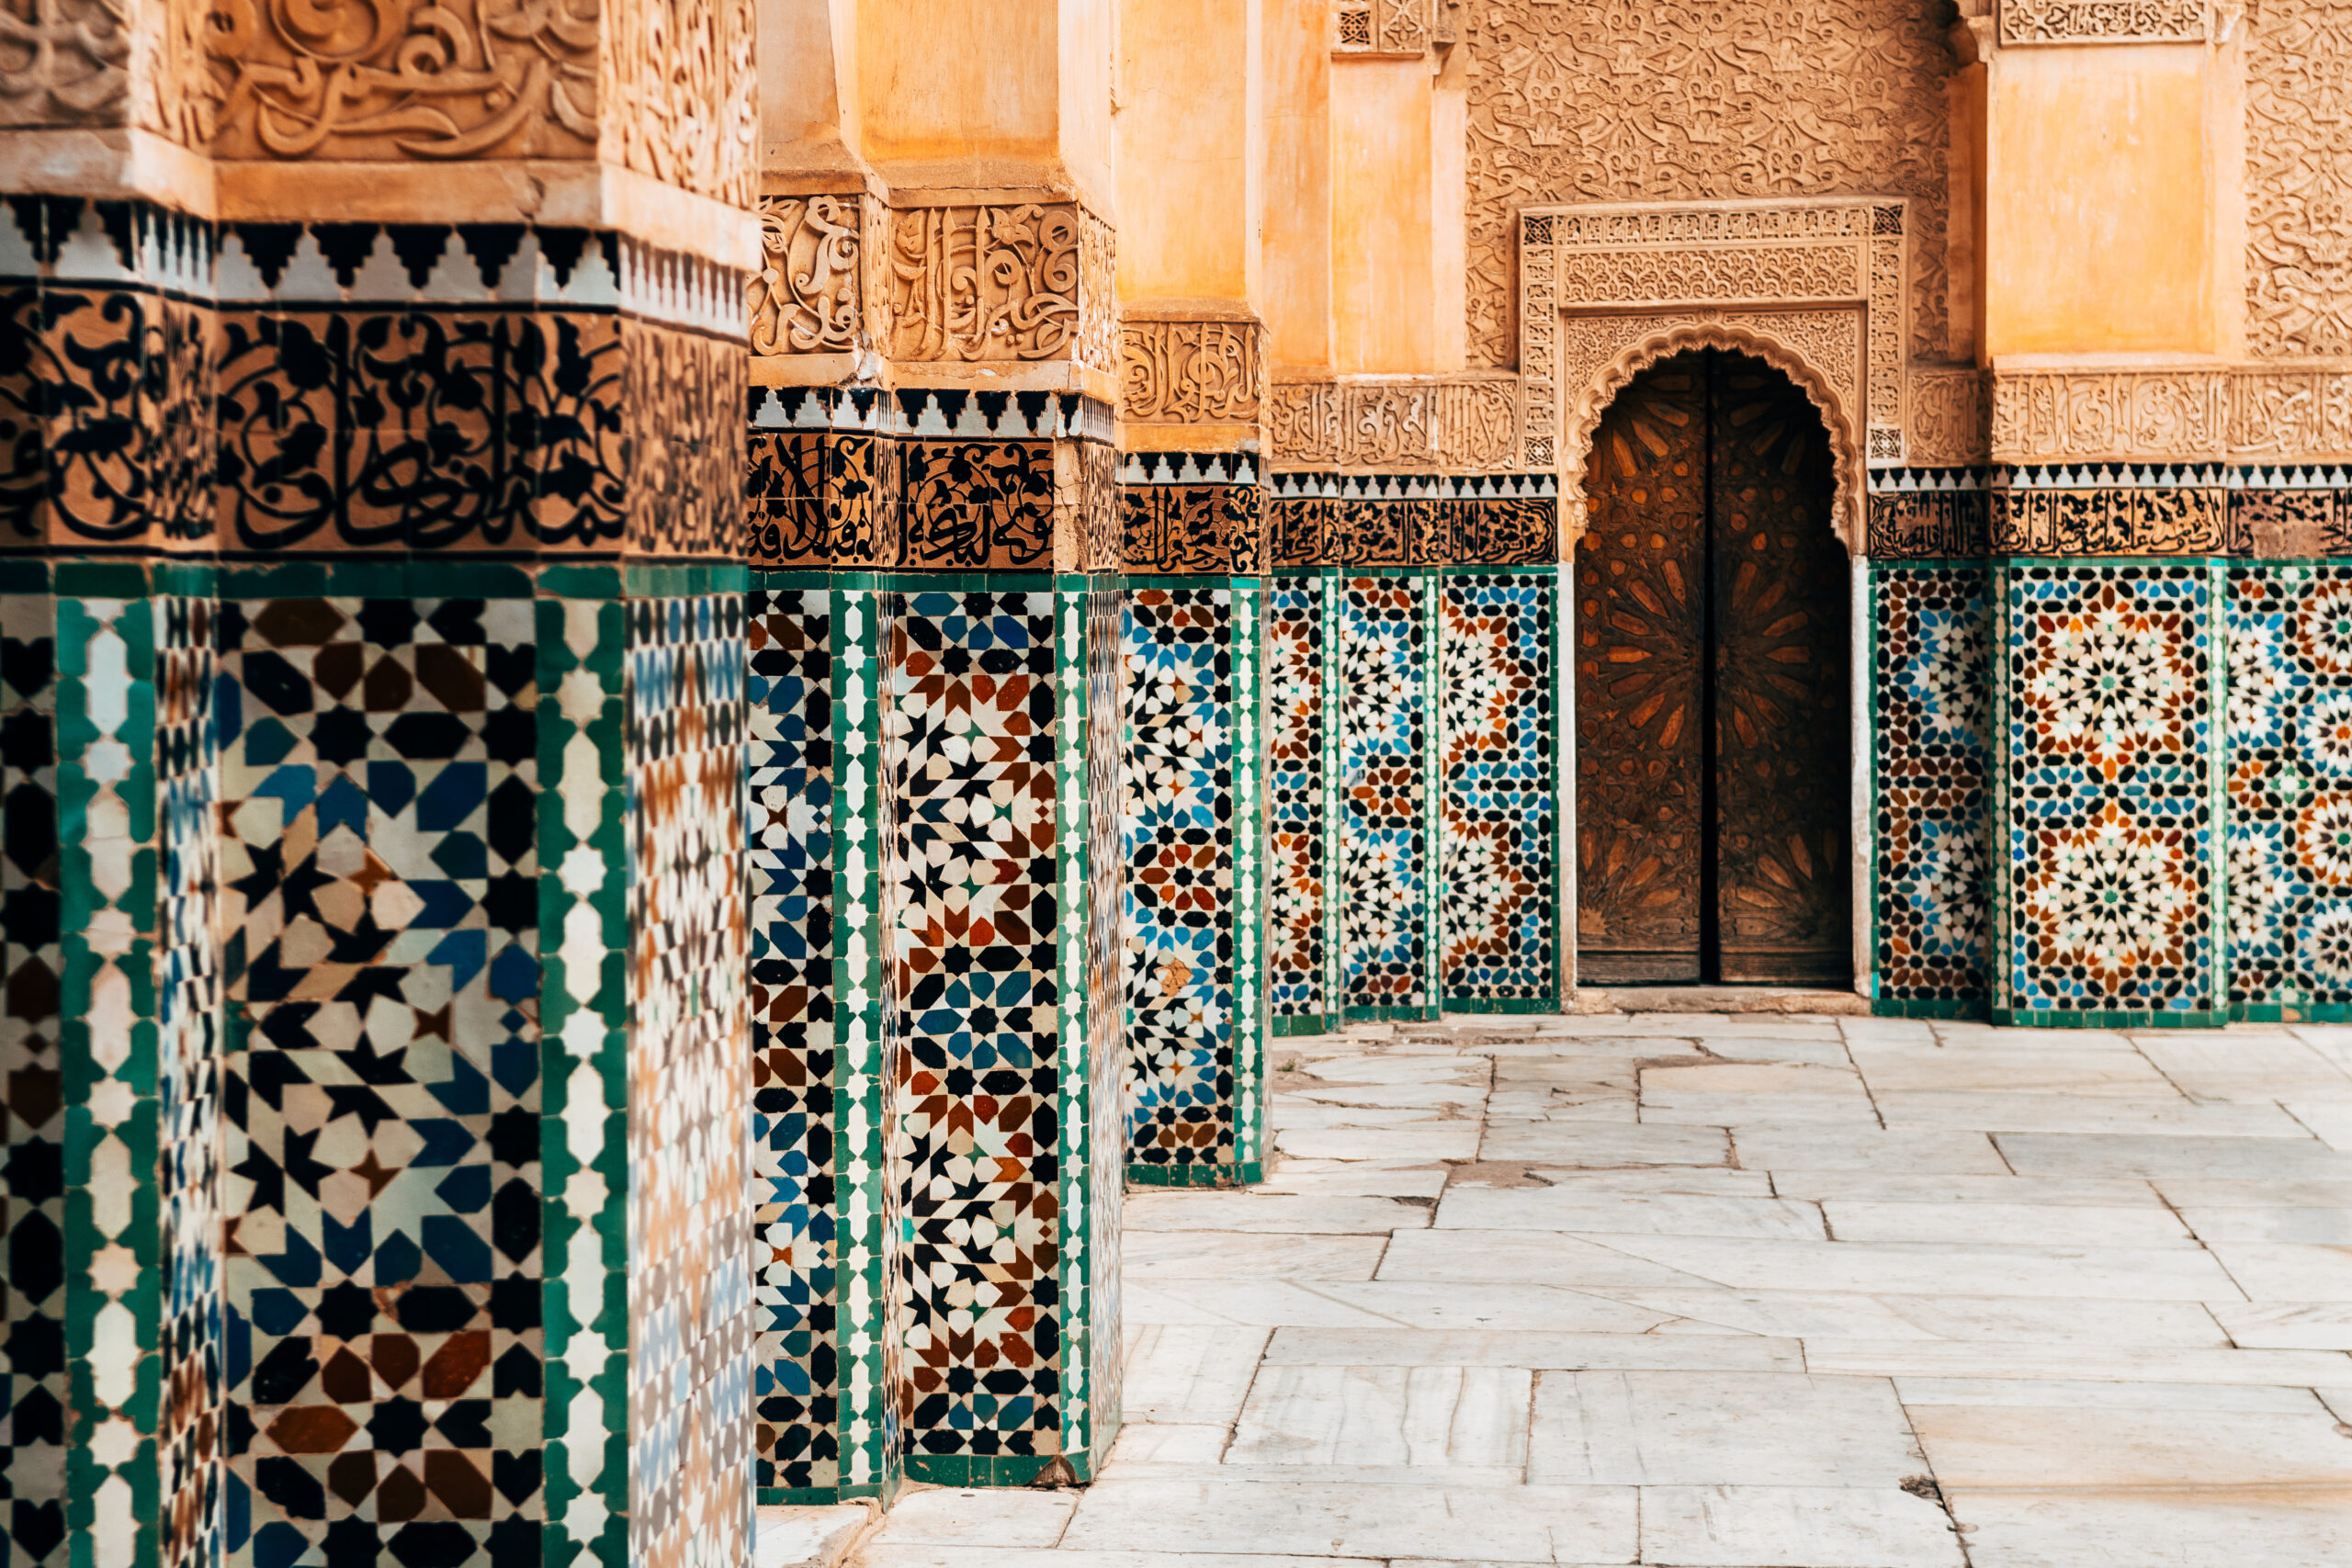 production-services-and-filming-in-marocco-colorful-ornamental-tiles-courtyard